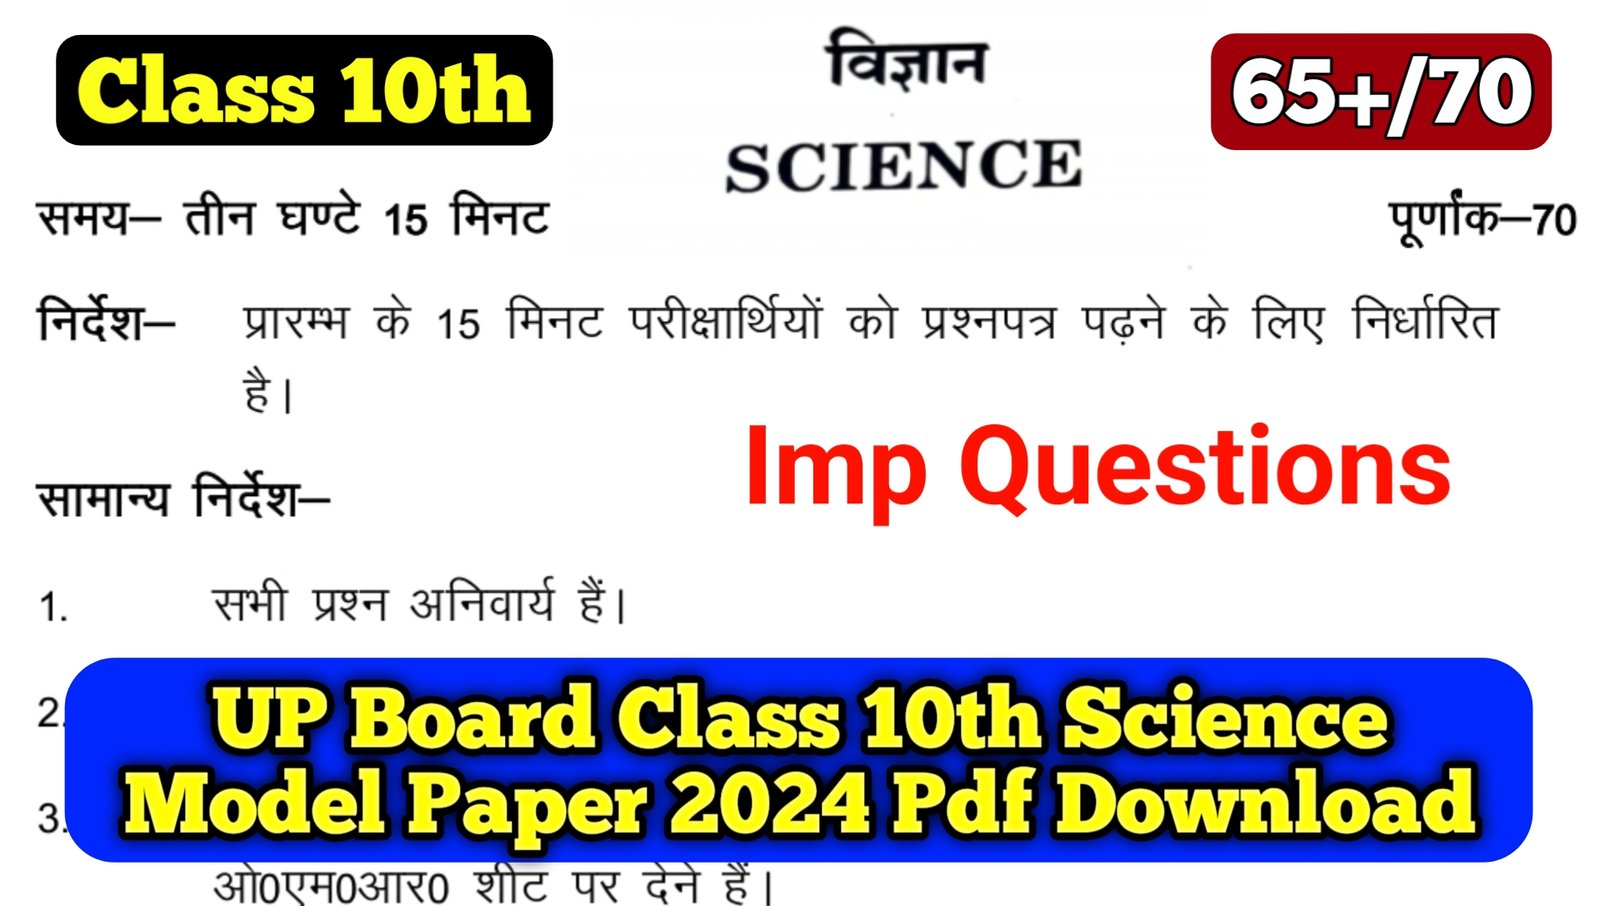 UP Board Class 10th Science Model Paper 2024 Pdf Download